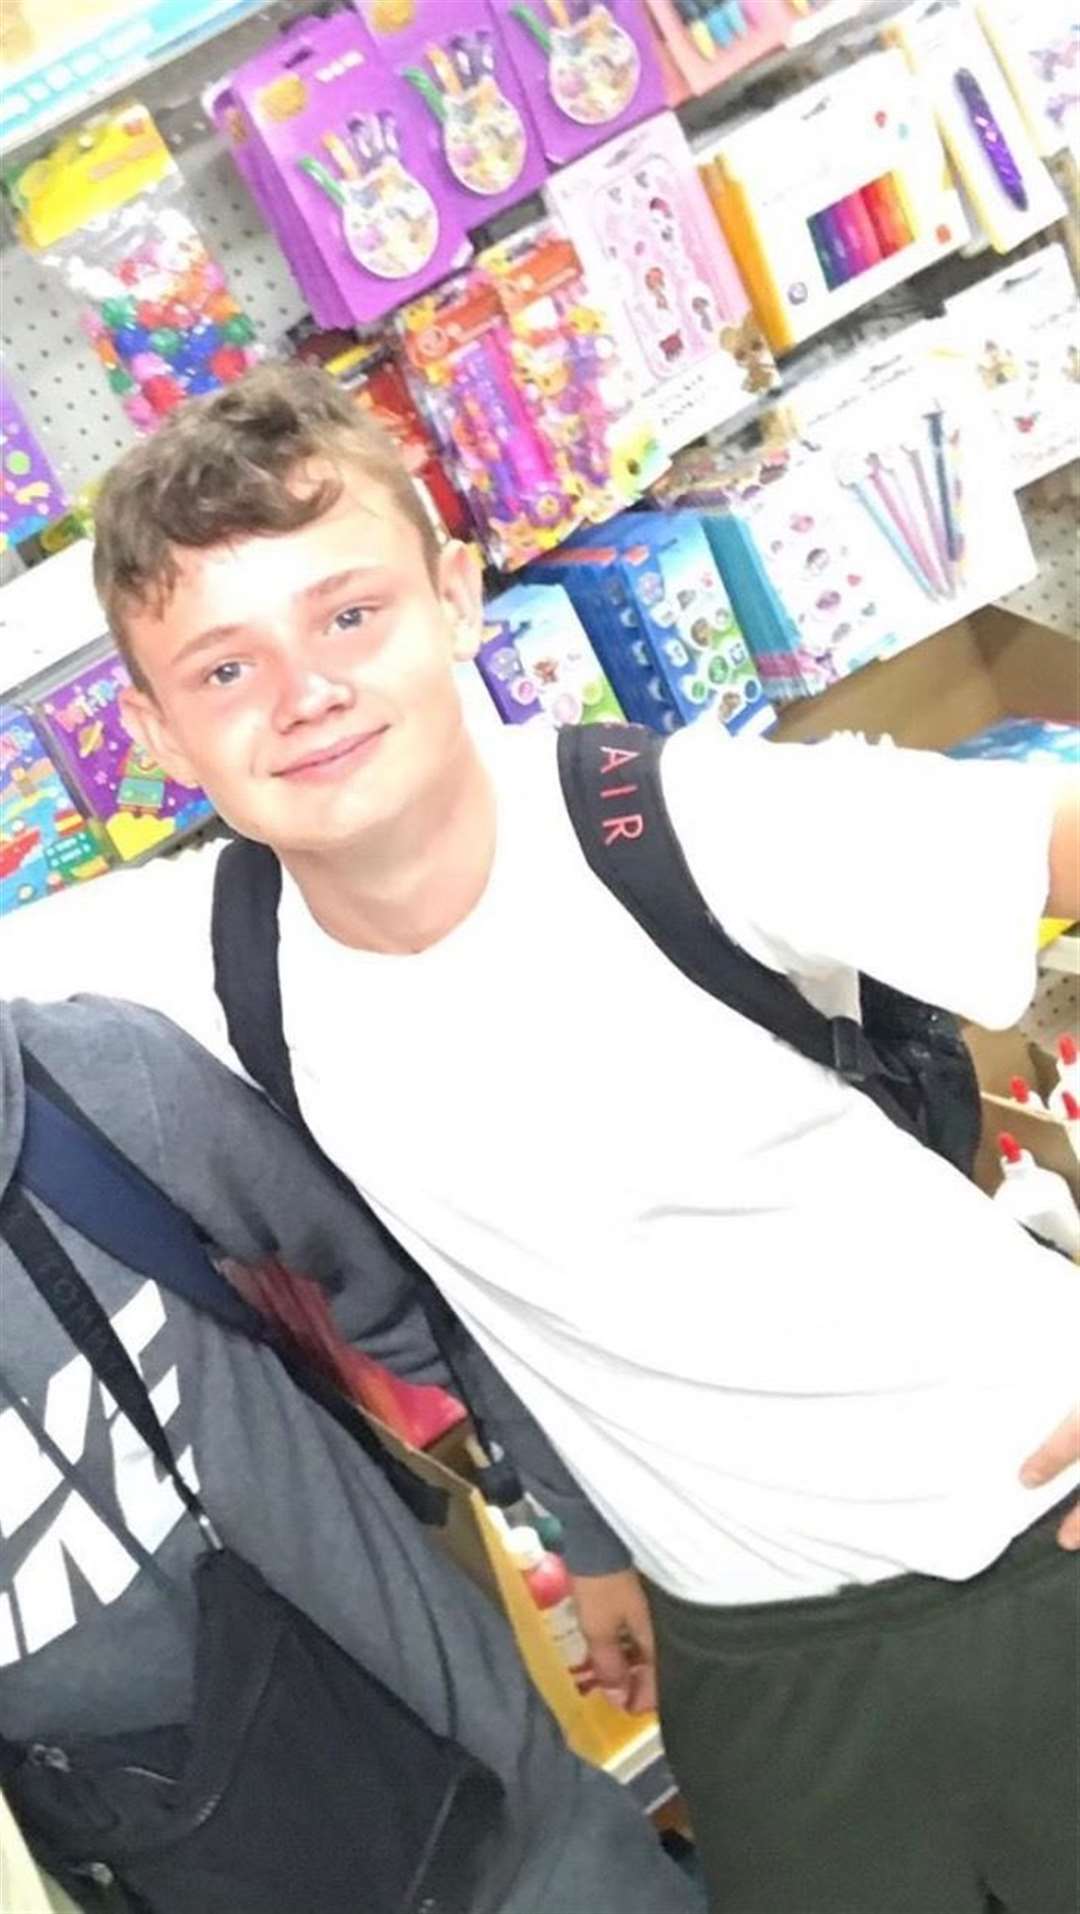 George Buckley, 15, died after falling on tracks. Picture: British Transport Police